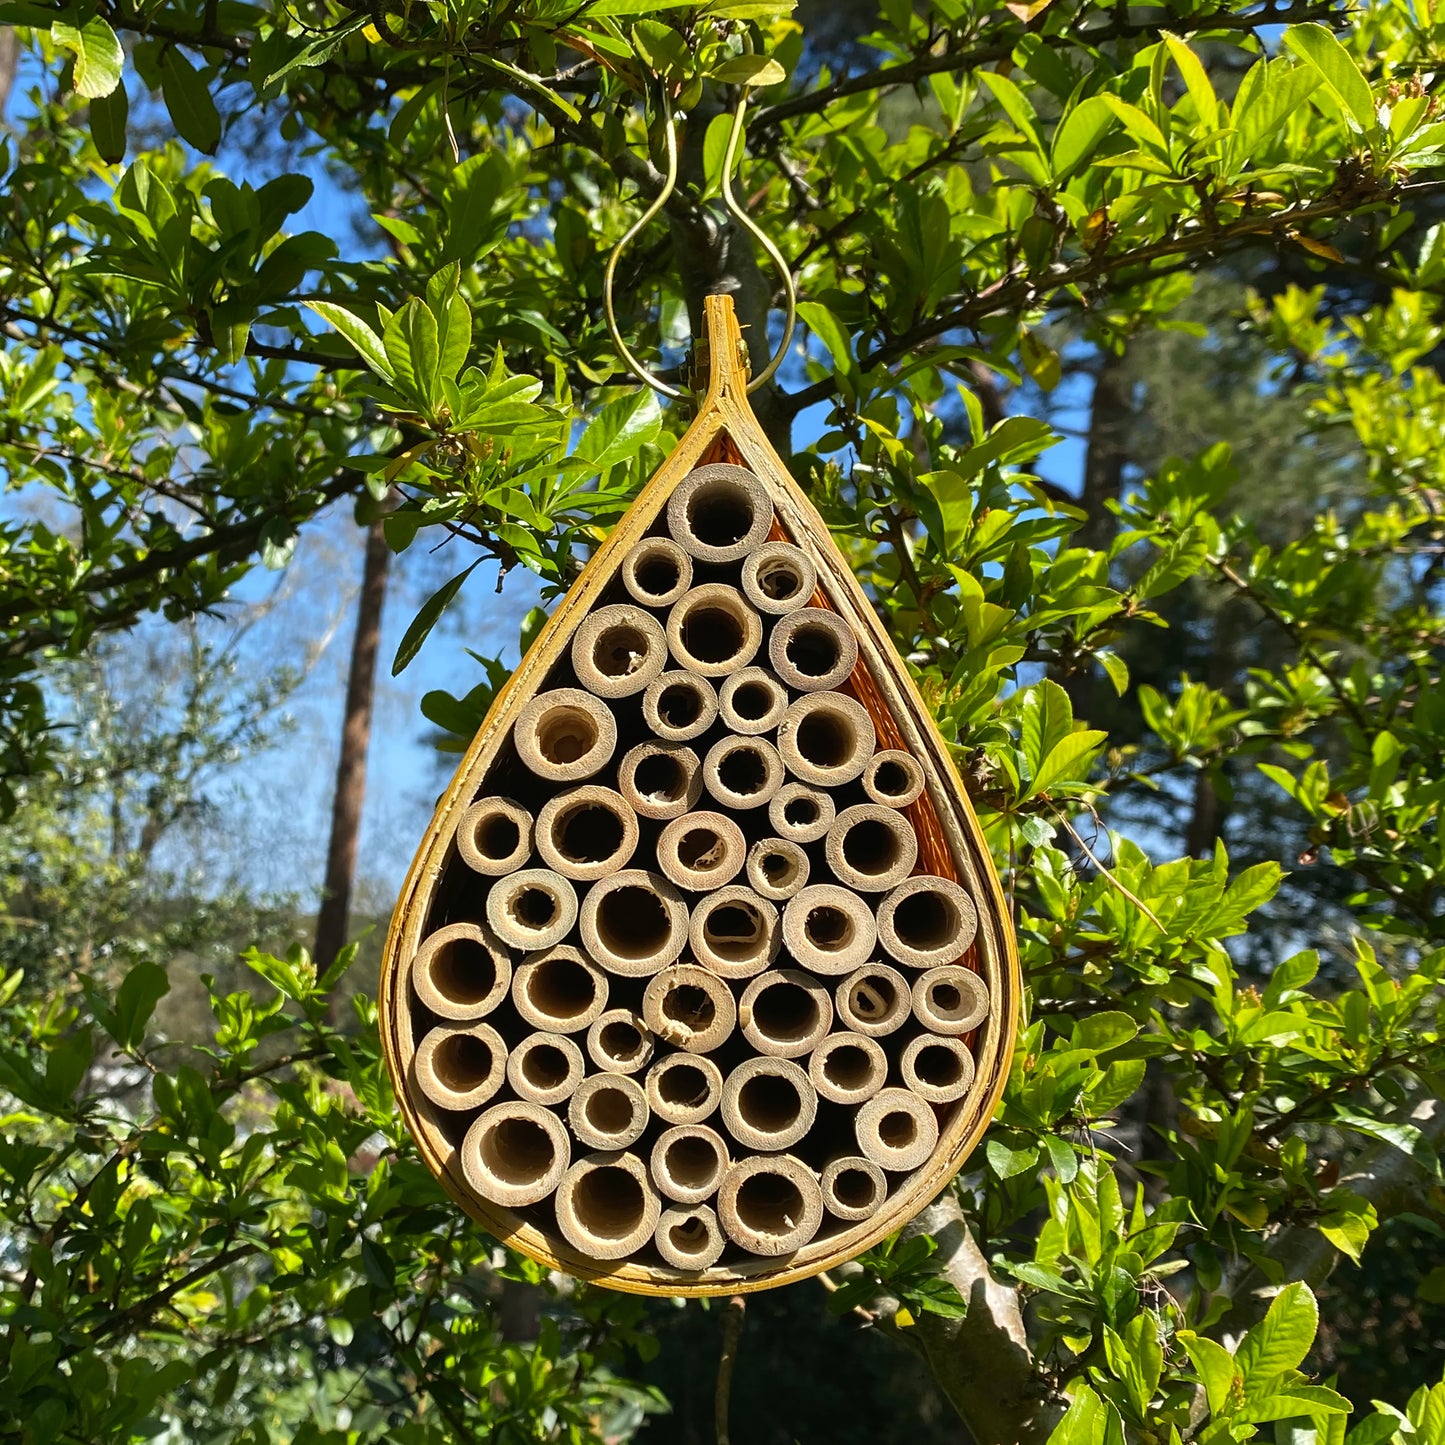 Hanging Teardrop Bird Nest Box, Insect Hotel & Butterfly House Wildlife Care Set